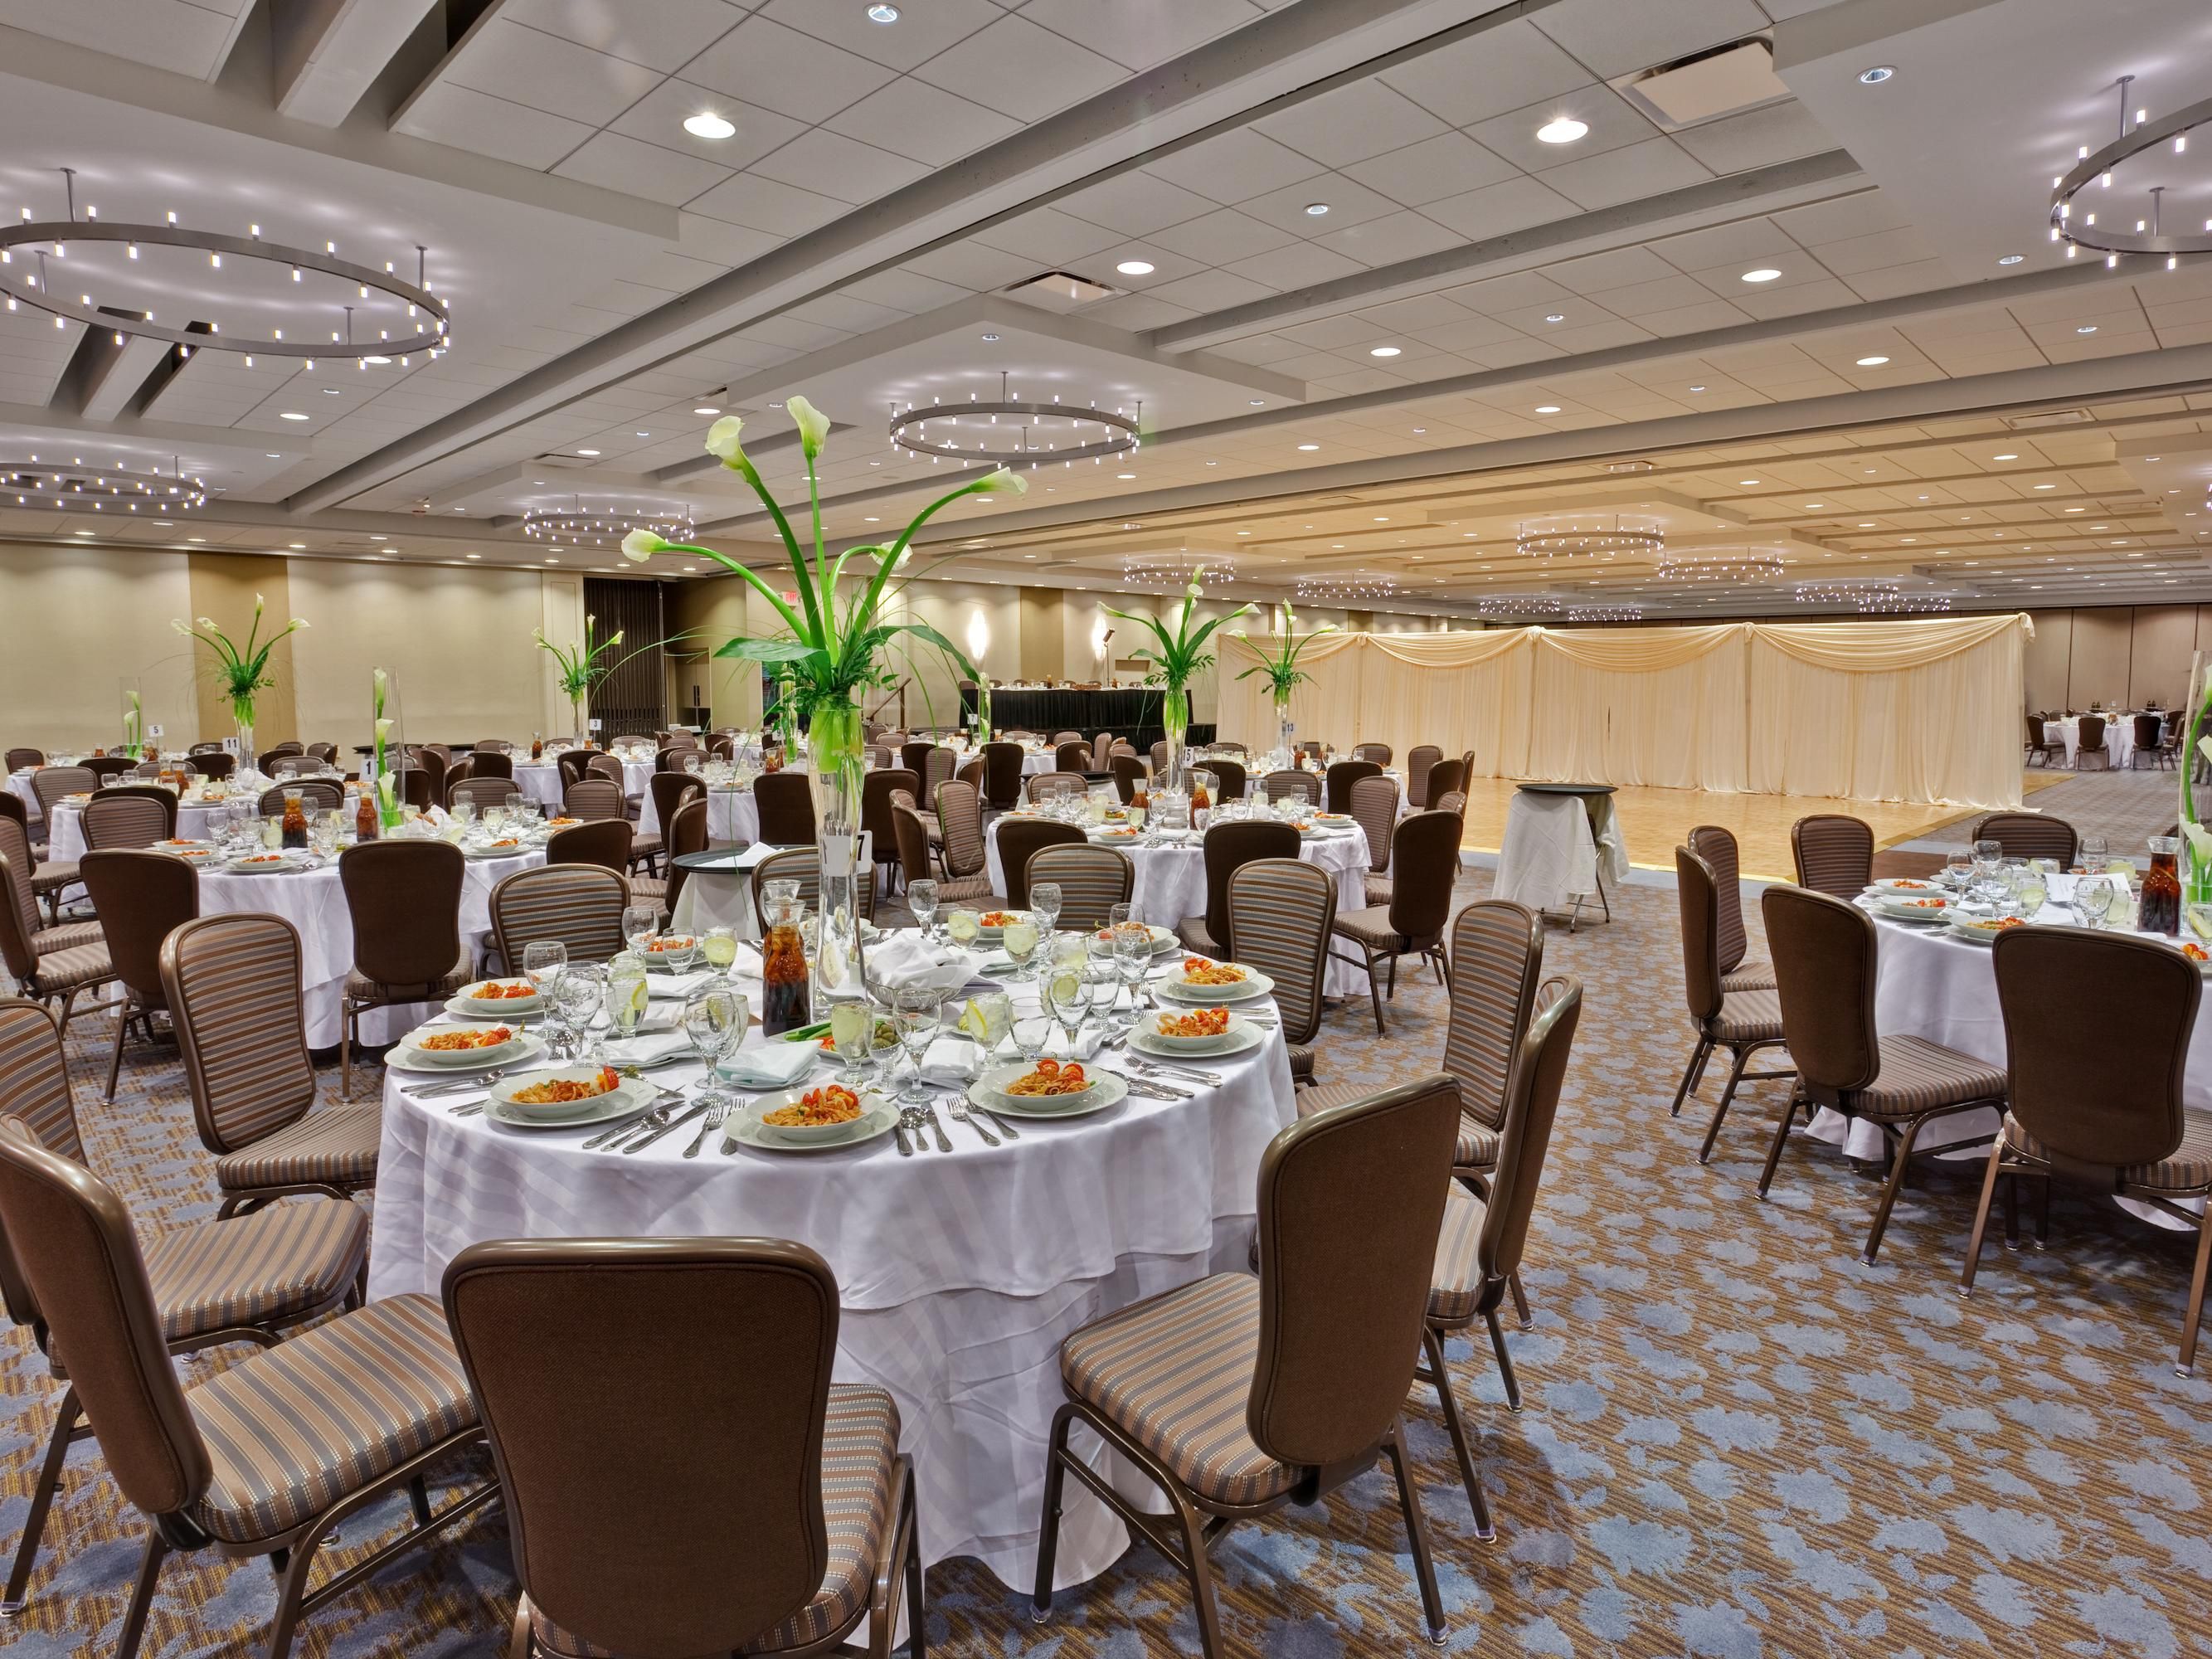 Event space designed to accommodate weddings